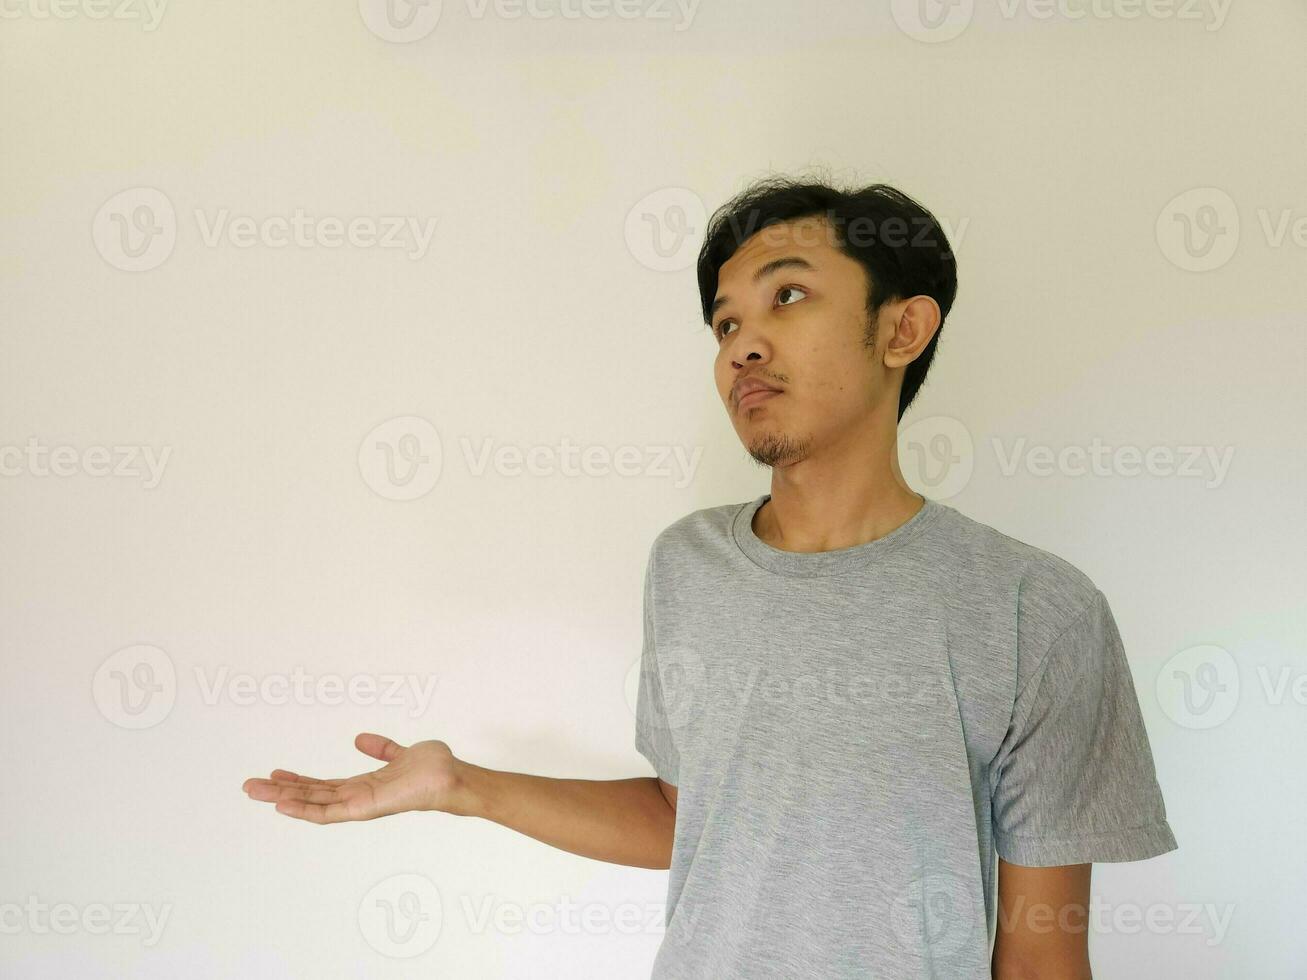 Worries face expression of Asian man who got problem isolated on white photo